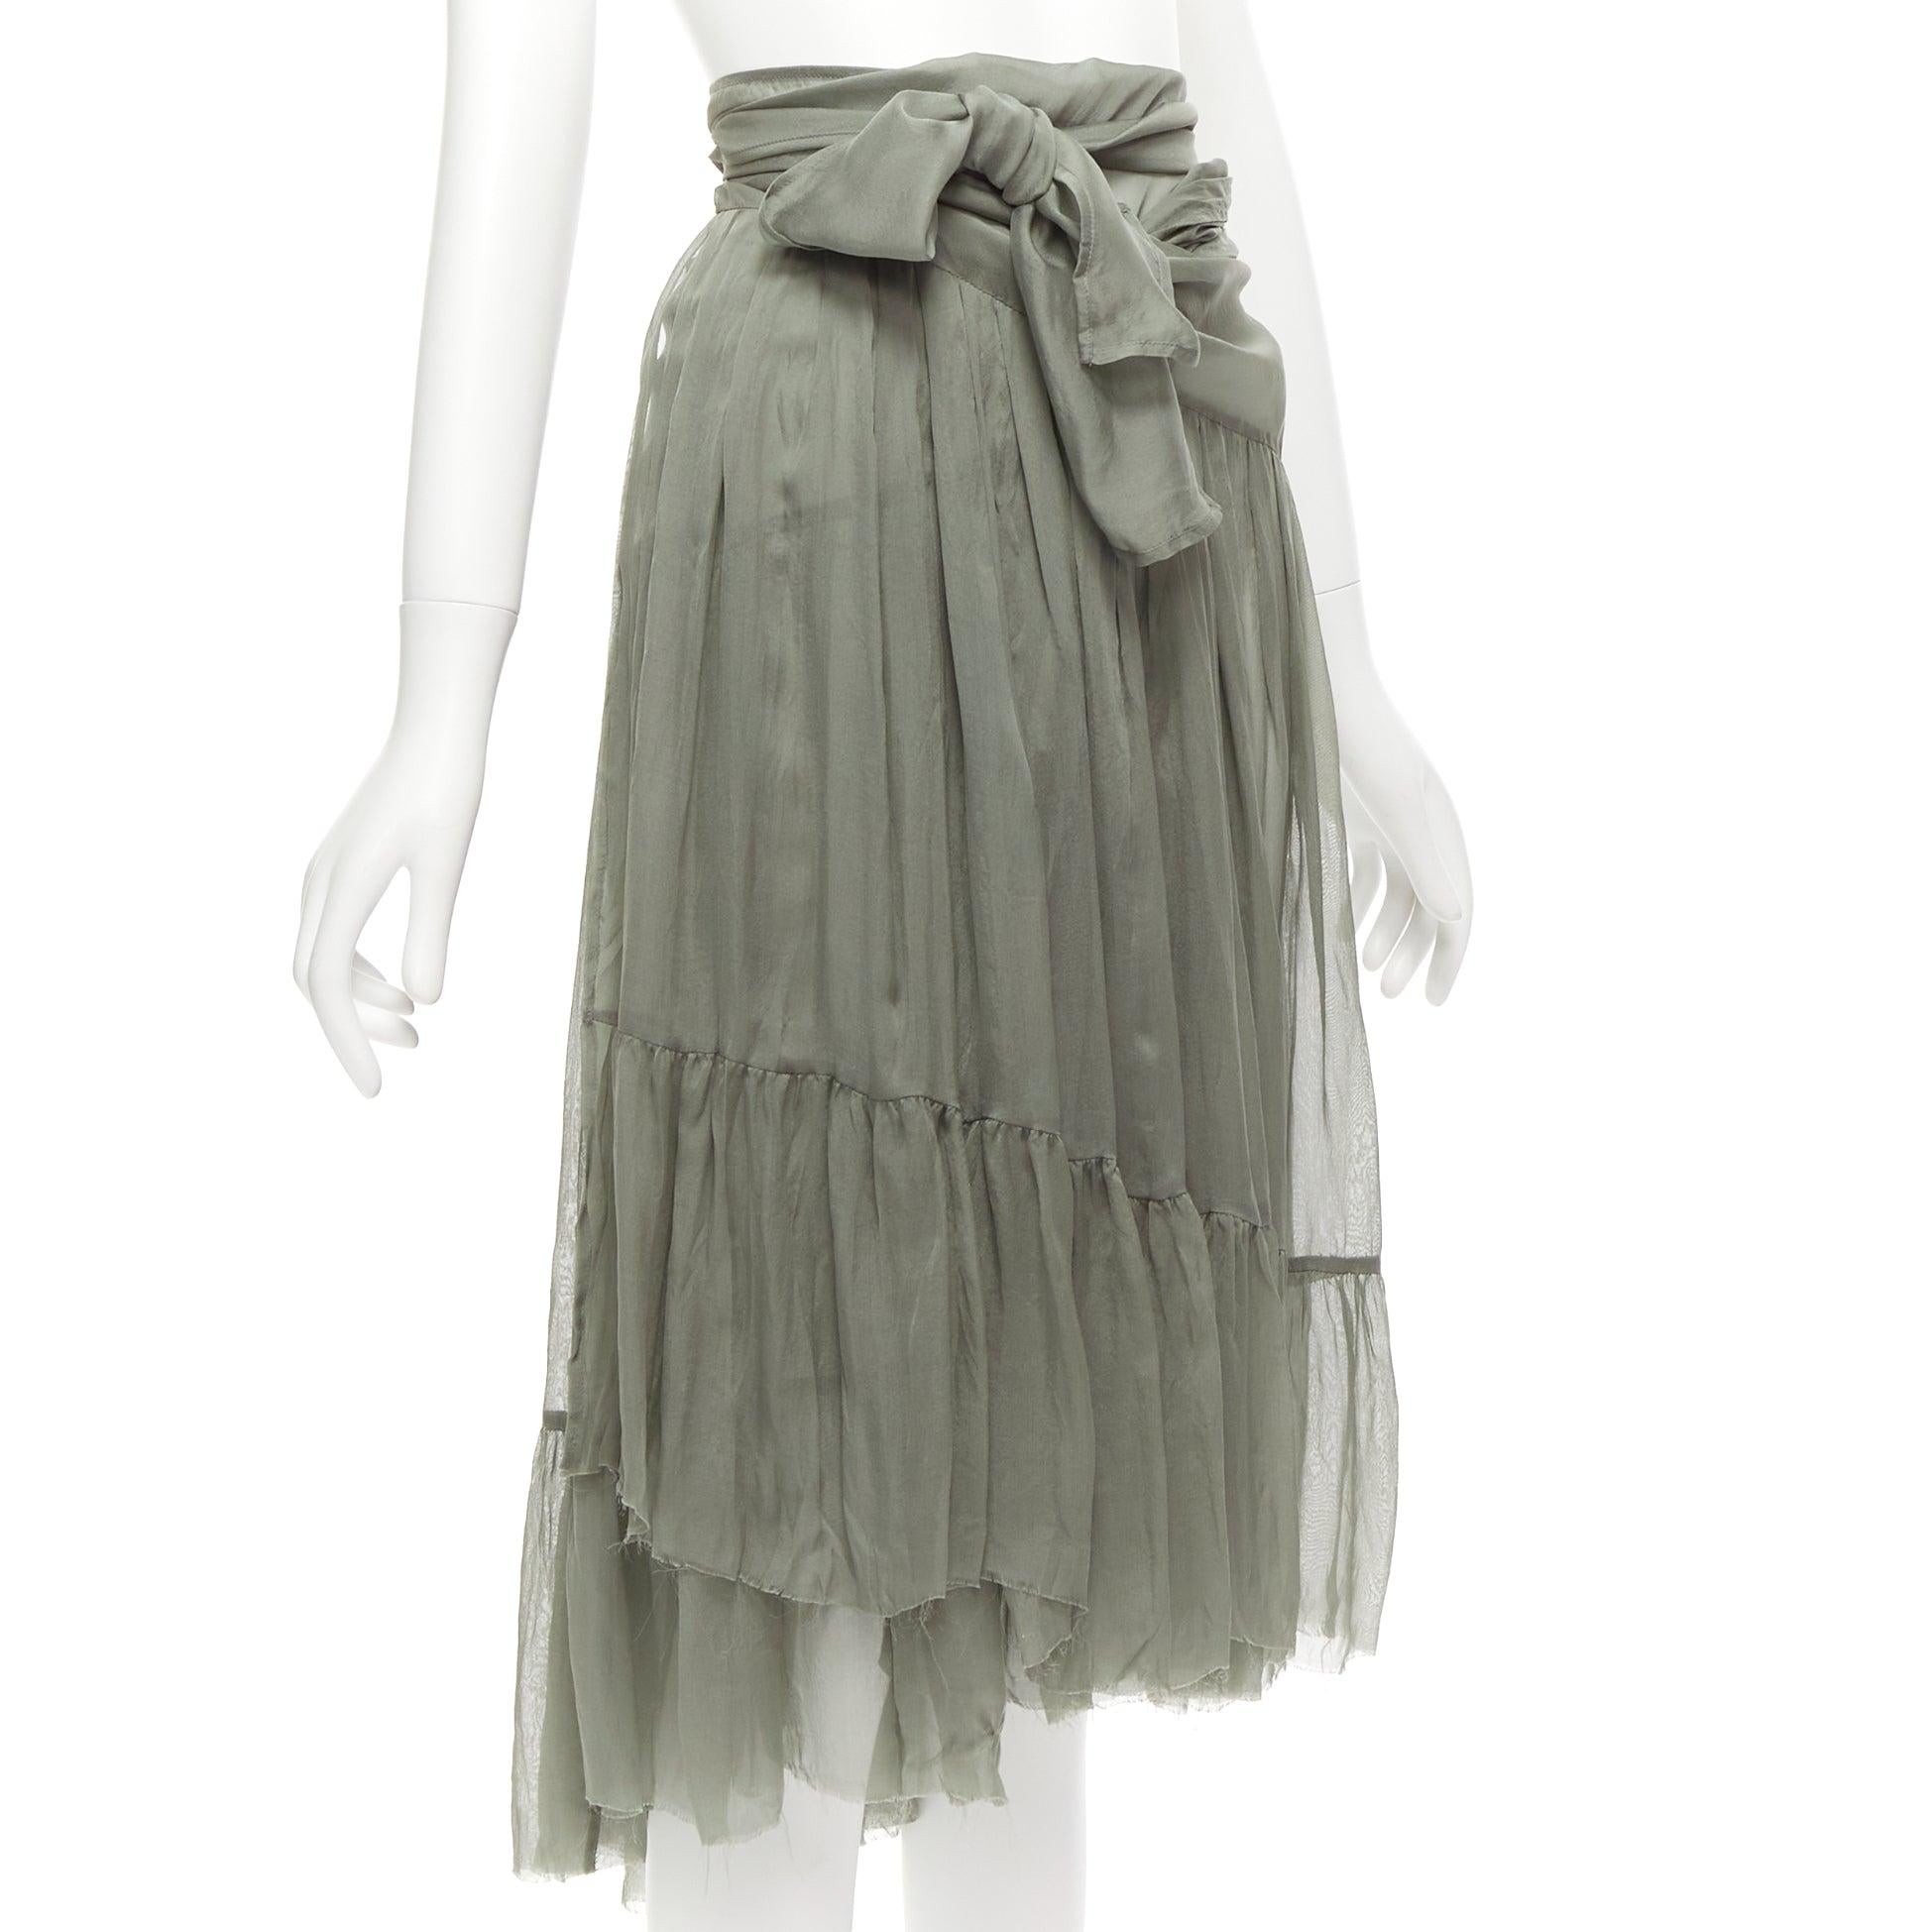 DRIES VAN NOTEN 100% silk military green sheer wrap tie skirt FR38 M
Reference: CELG/A00271
Brand: Dries Van Noten
Material: Silk
Color: Green
Pattern: Solid
Closure: Wrap Tie
Made in: Belgium

CONDITION:
Condition: Very good, this item was